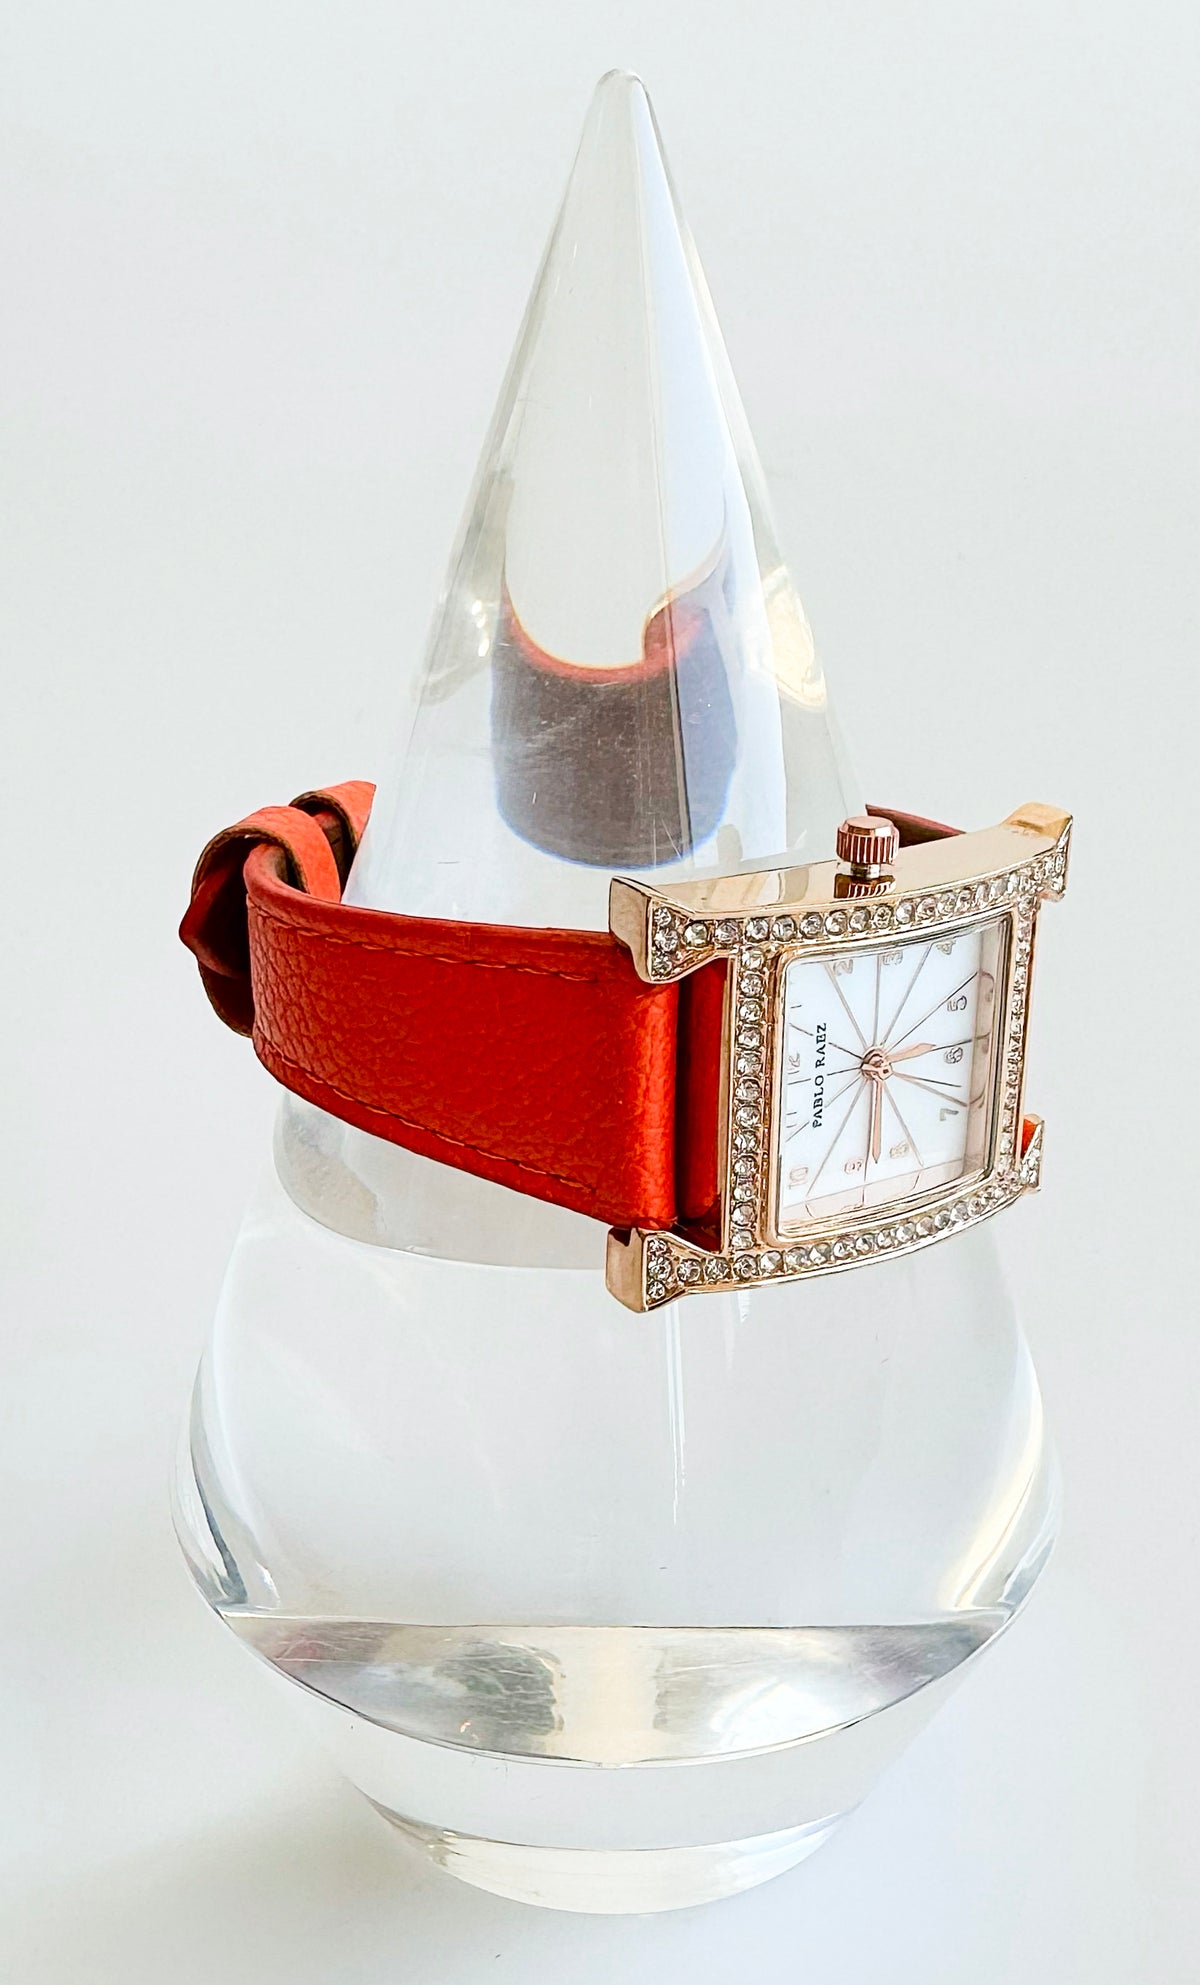 Hotmes CZ Leather Watch - Orange-260 Other Accessories-Chasing Bandits-Coastal Bloom Boutique, find the trendiest versions of the popular styles and looks Located in Indialantic, FL